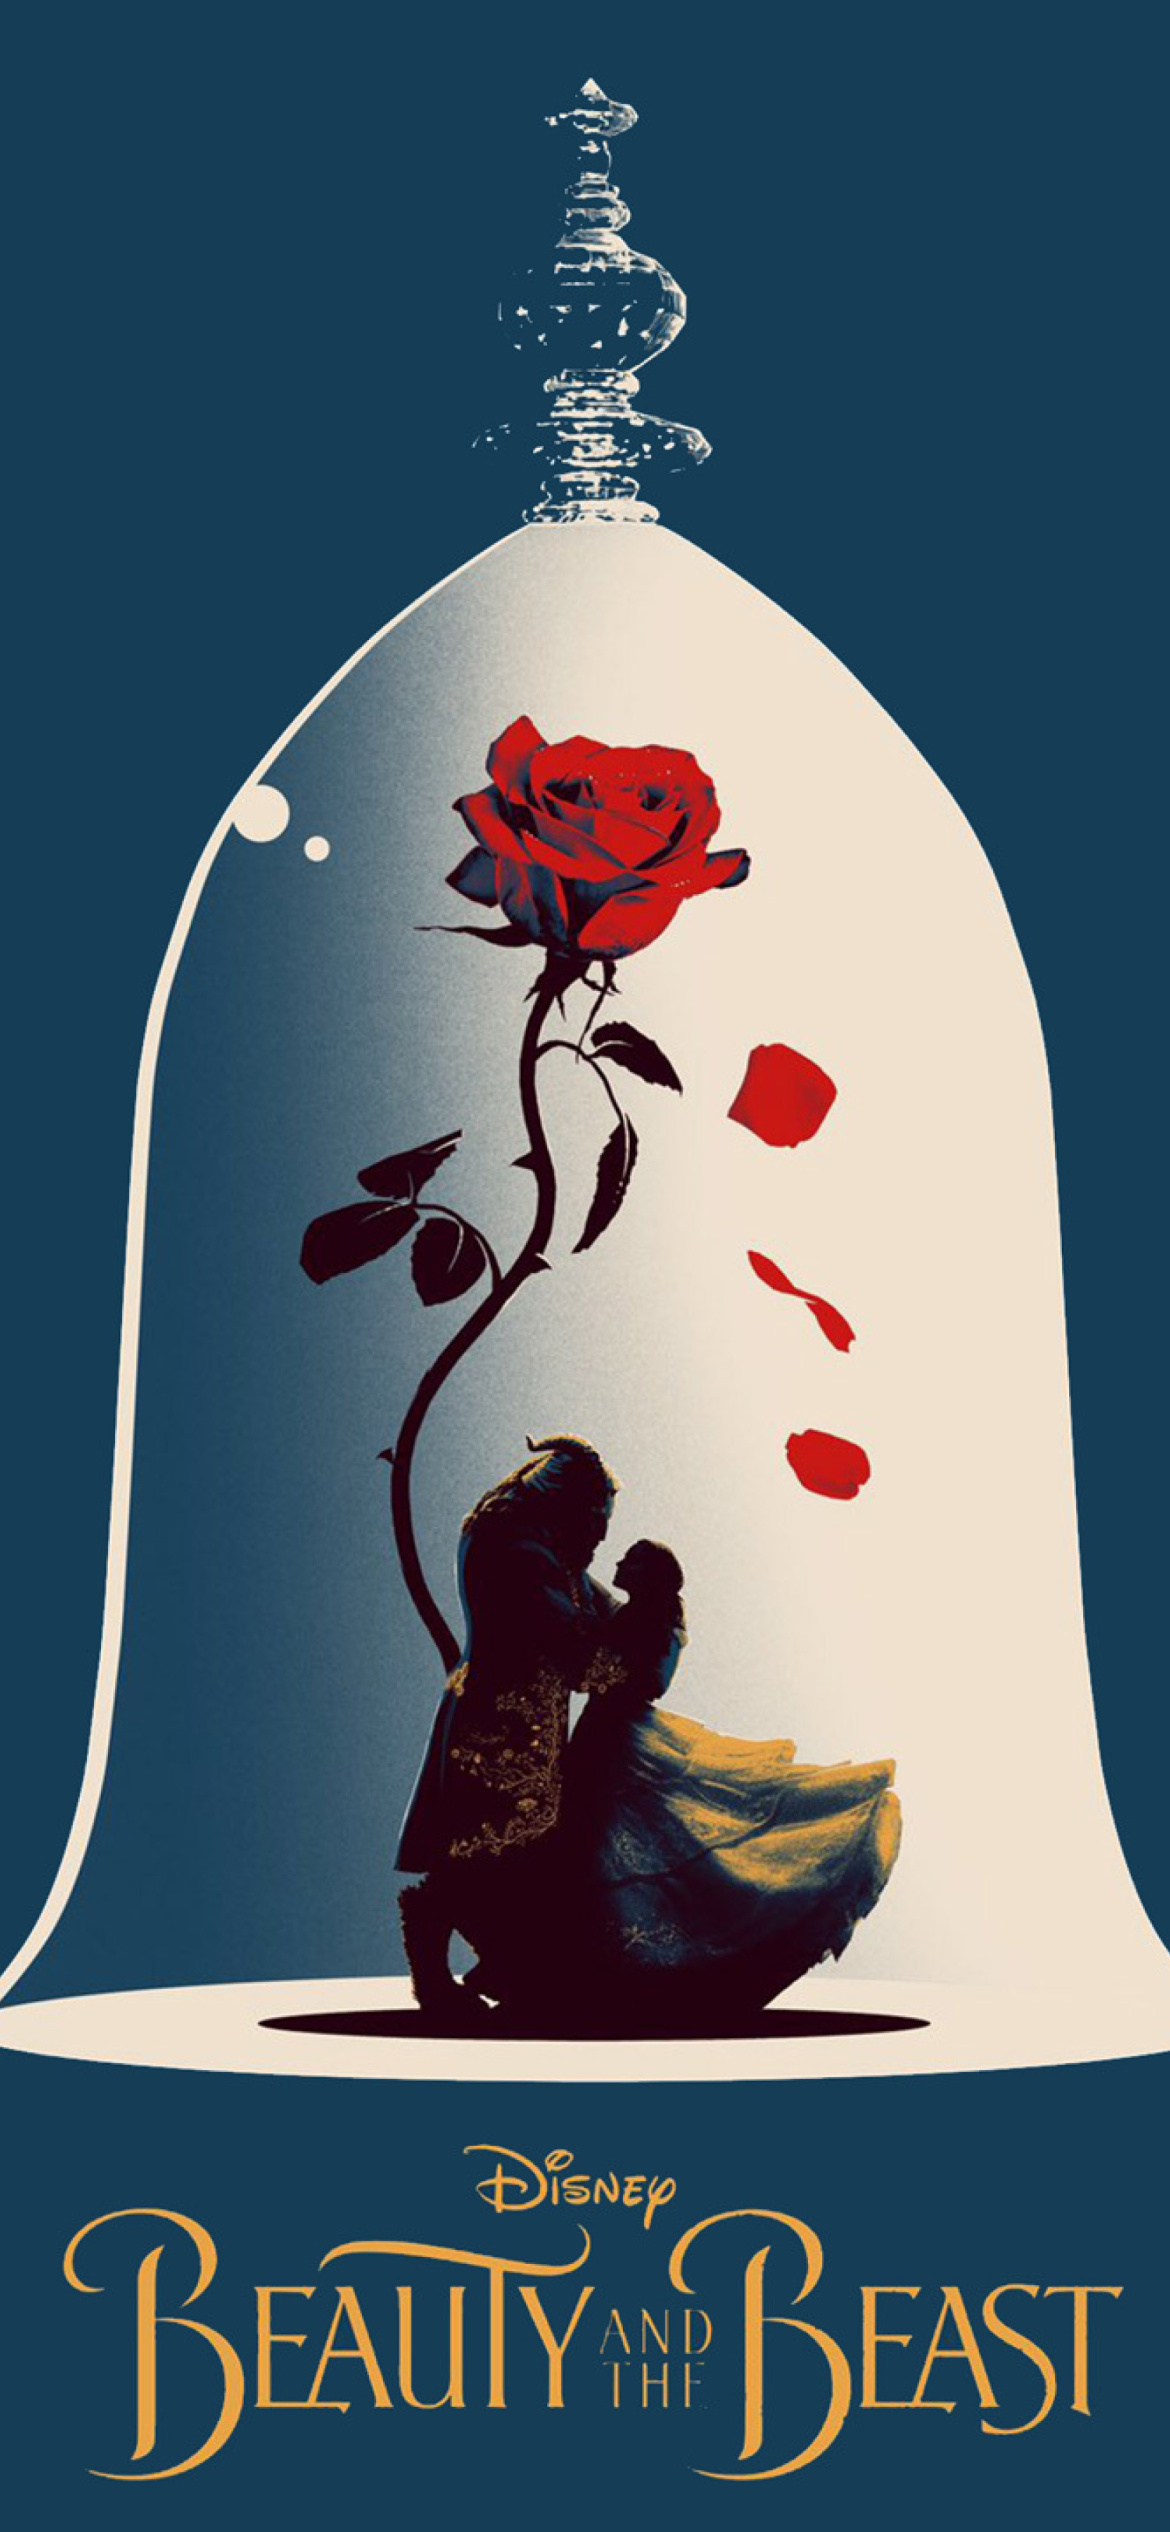 Beauty and the Beast Poster wallpaper 1170x2532